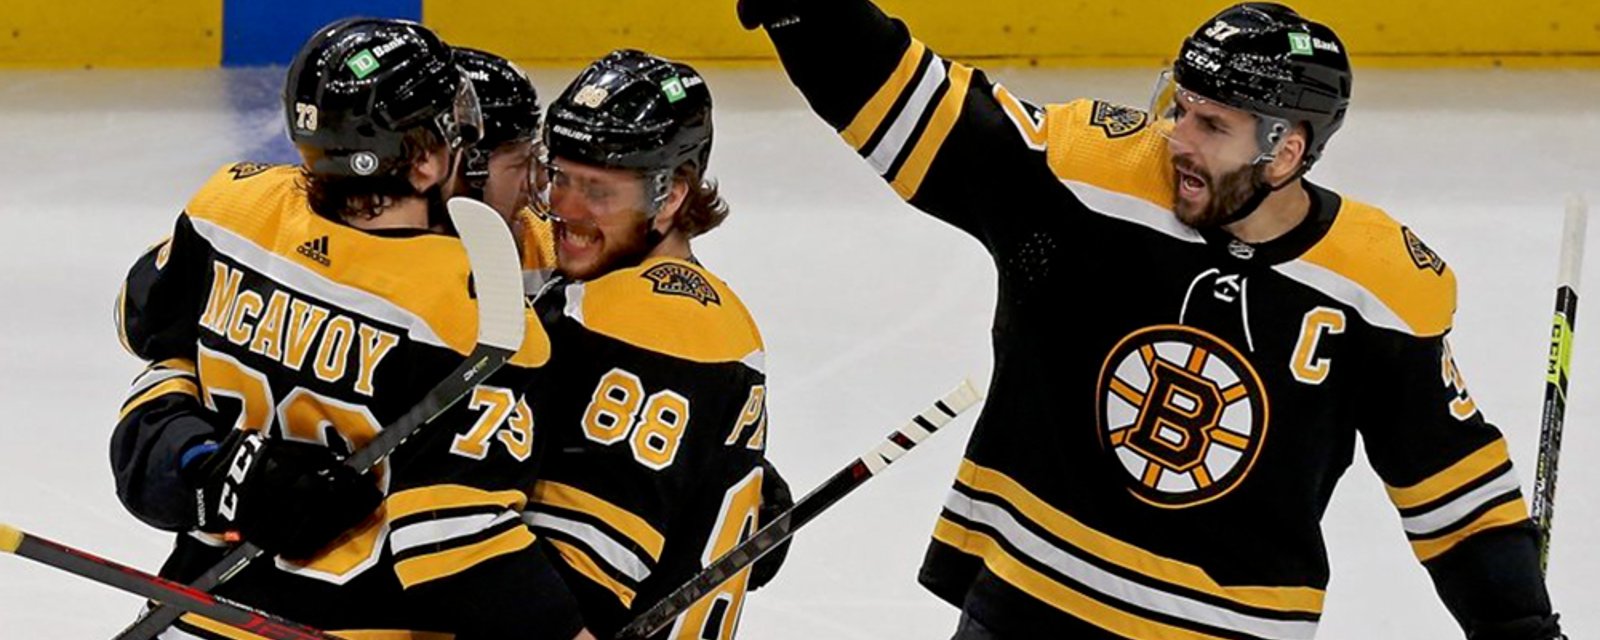 Bruins fans may smile when they see Boston's Stanley Cup odds 